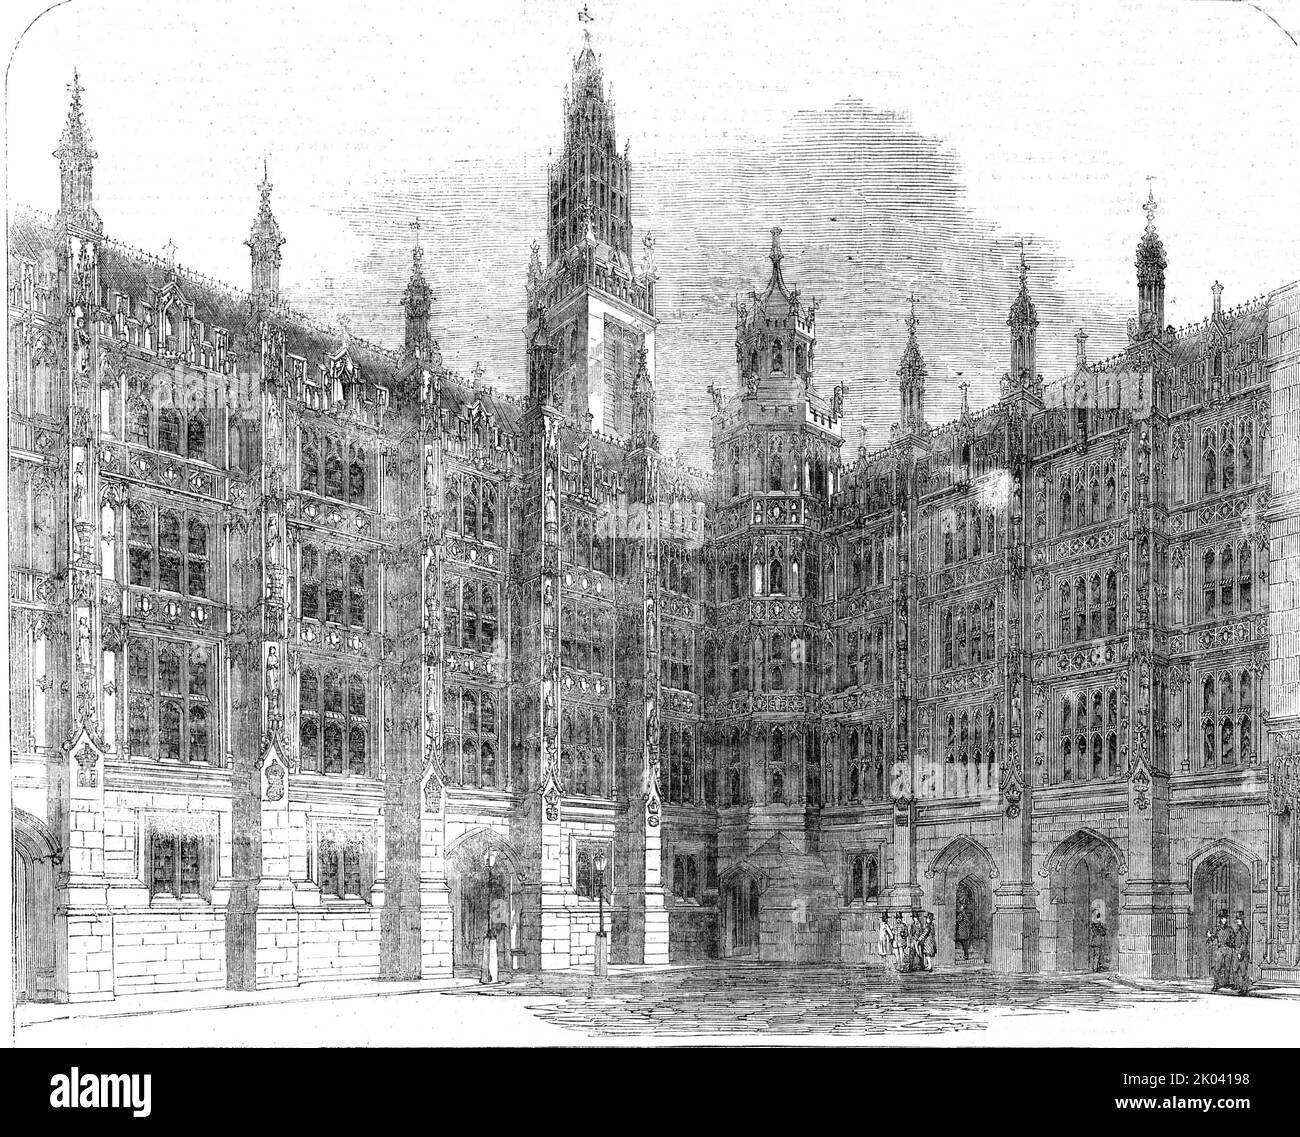 The New Houses of Parliament - Entrance to the Star-Chamber Court, New Palace-Yard, 1854. Palace of Westminster, London. 'This beautiful front is a portion of that between Westminster Hall and the magnificent clock-tower, which is nearing completion. In our View are seen the carriage-ways for entrance and exit: on the right, is the entrance for Members on foot, leading to a colonnade, by which, when the entrance is completed, the Staircase...is reached'. From &quot;Illustrated London News&quot;, 1854. Stock Photo